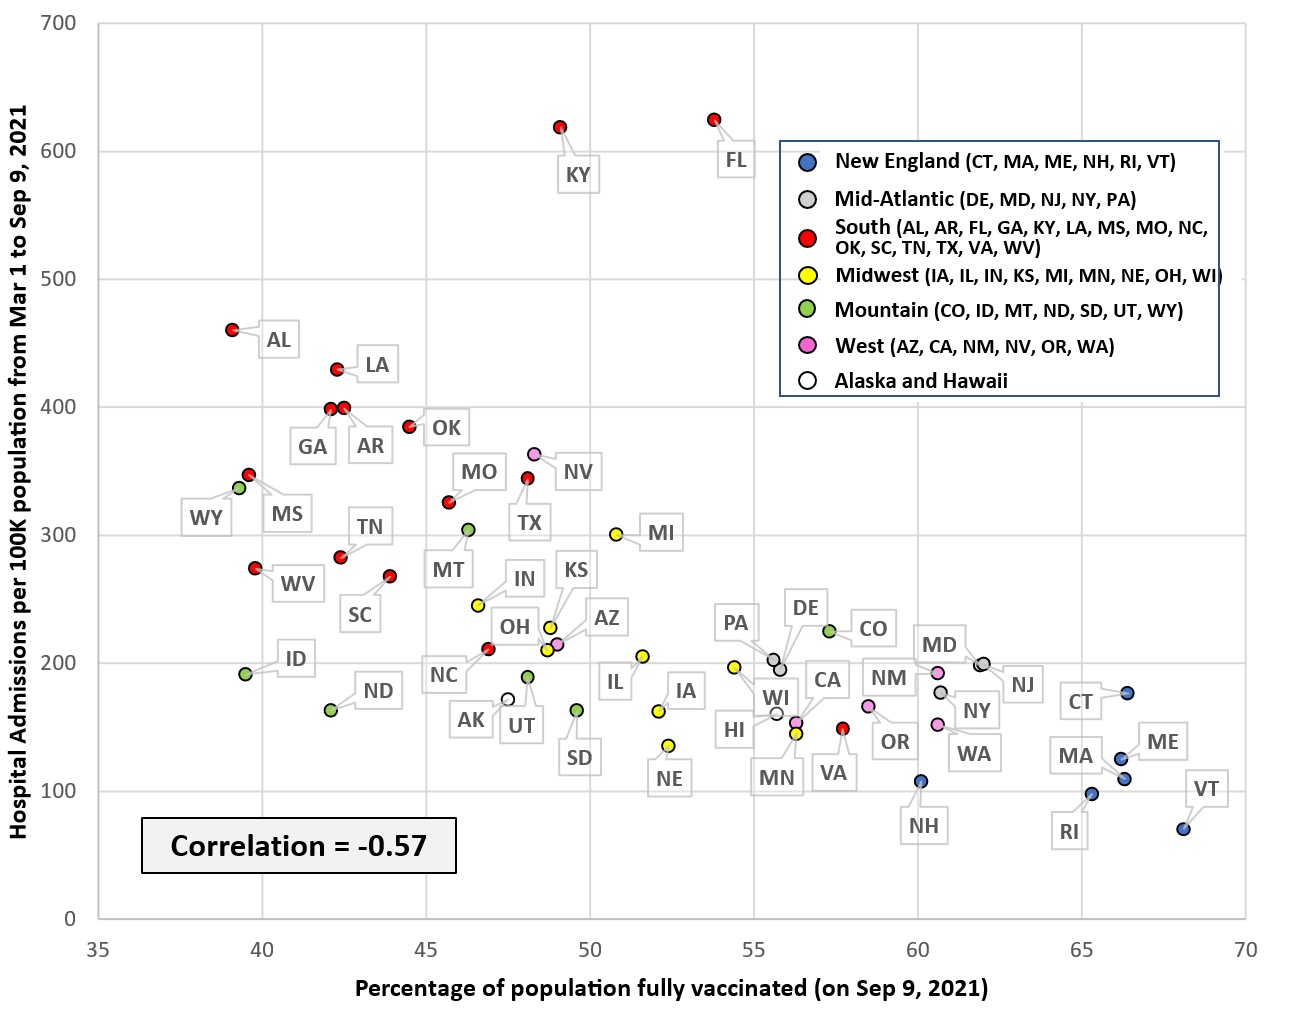 A scatter chart of vaccination percentage vs. hospital admissions